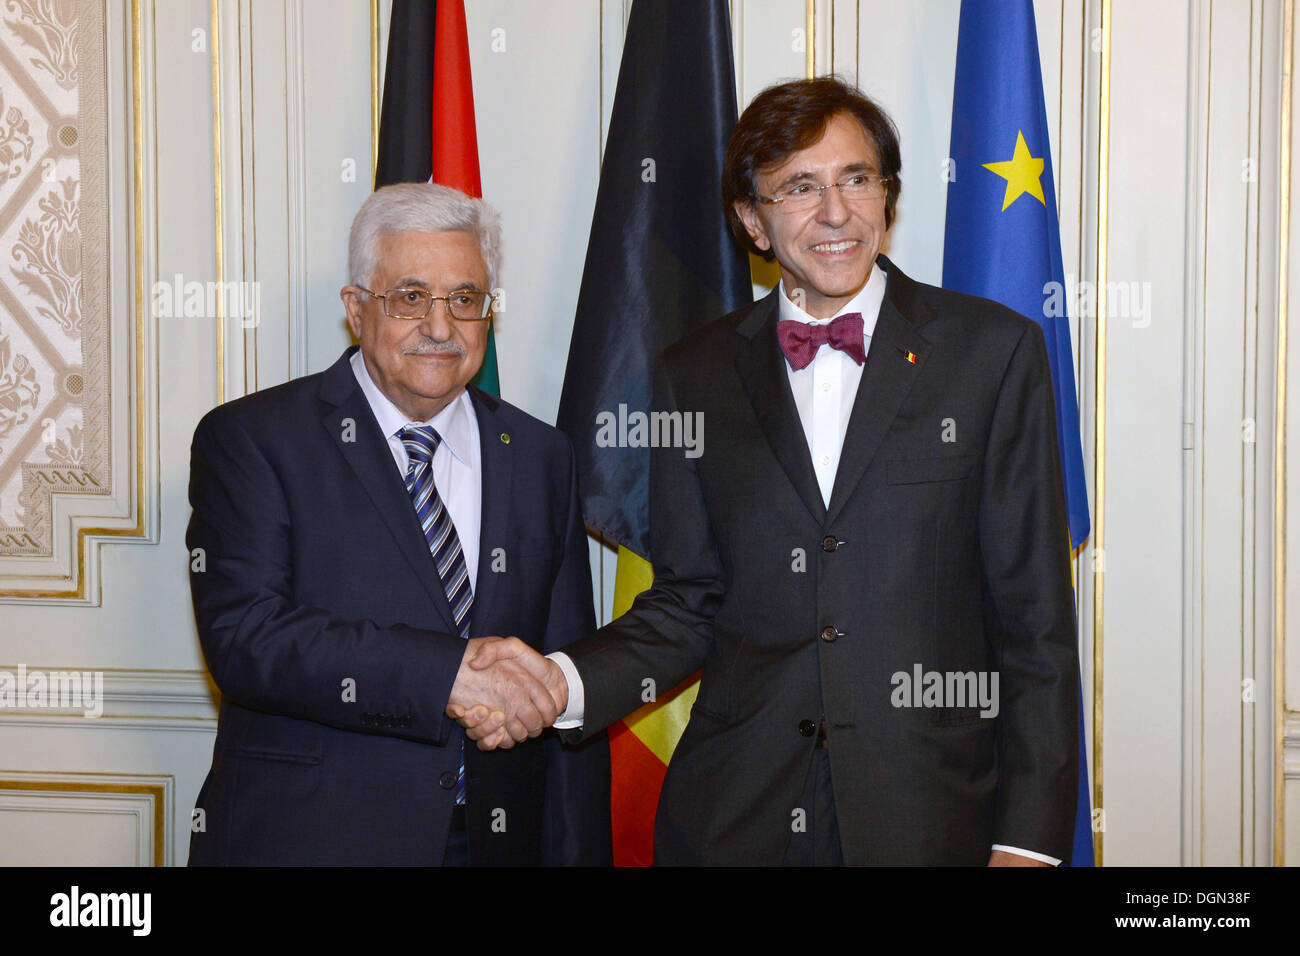 Brussels, Brussels, Belgium. 23rd Oct, 2013. Palestinian President Mahmoud Abbas (L) shakes hands with Belgian Prime Minister Elio Di Rupo on October 23, 2013 during a bilateral meeting at the Lambermont Residence of the Belgian prime minister in Brussels Credit:  Thaer Ganaim/APA Images/ZUMAPRESS.com/Alamy Live News Stock Photo